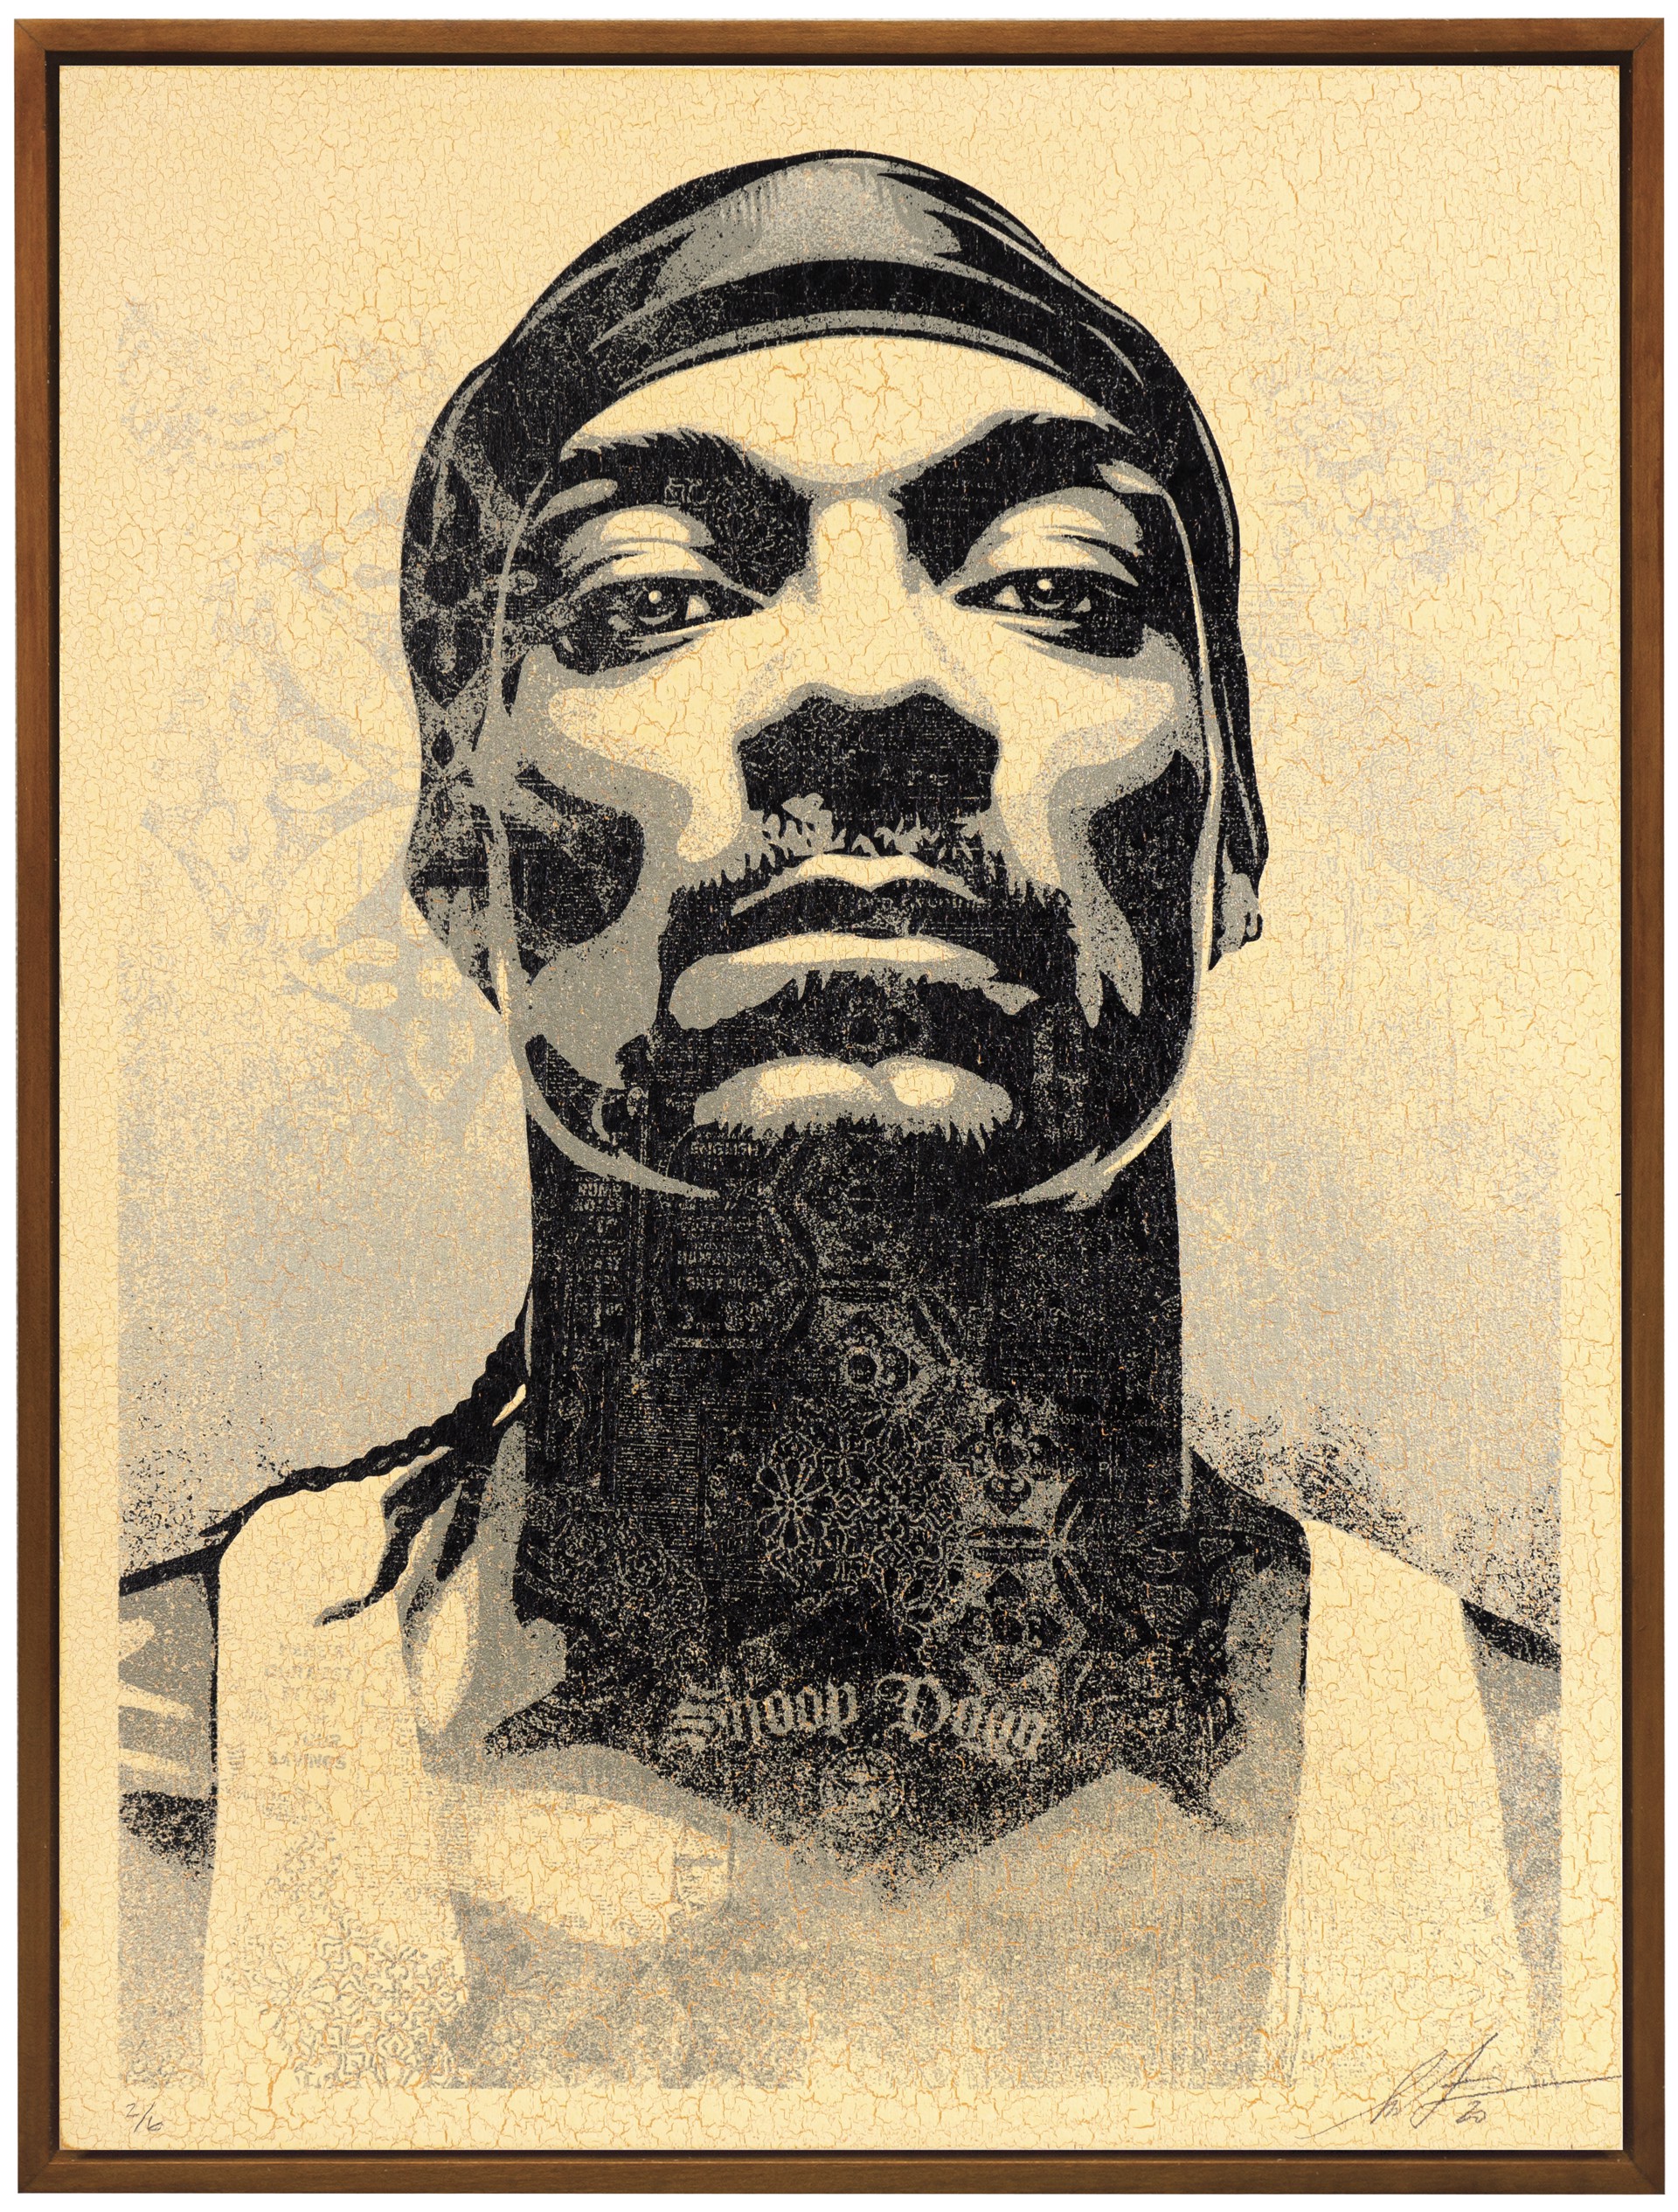 Snoop D-O Double G by Shepard Fairey / Limited editions